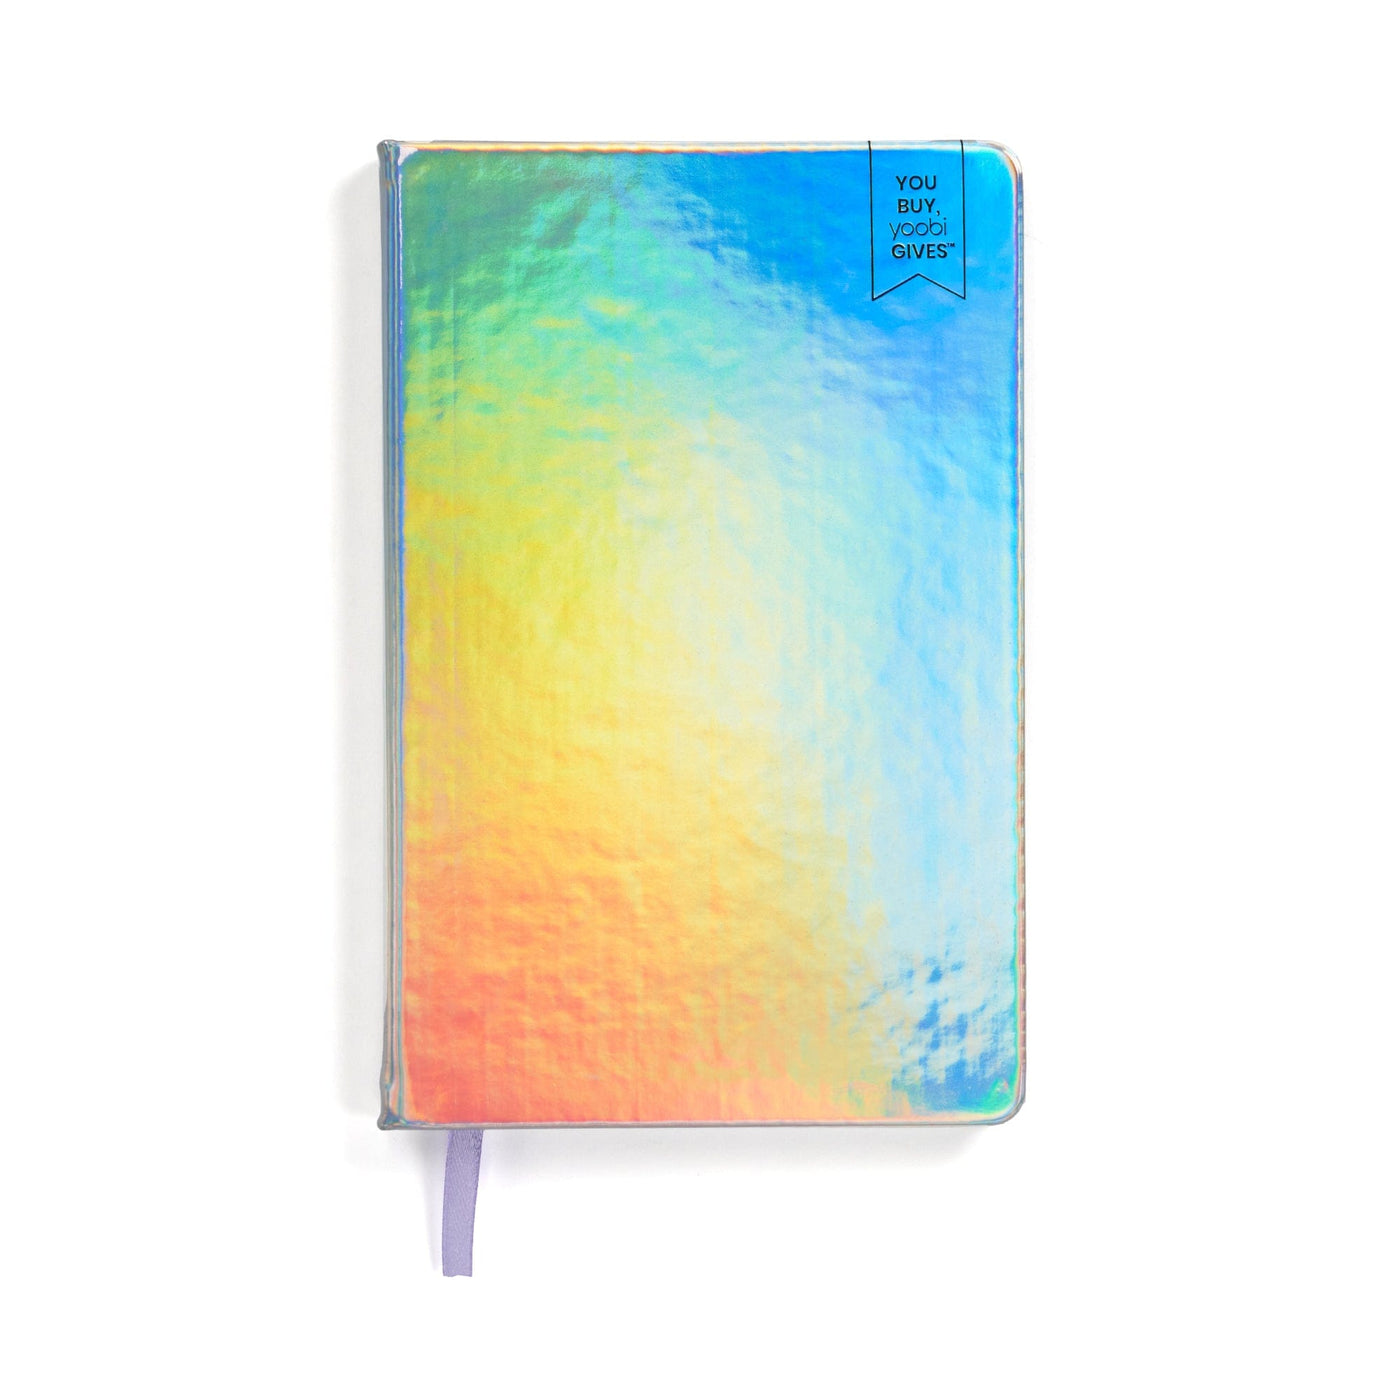 Holographic journal - blue, green, yellow, orange with lavender ribbon bookmark